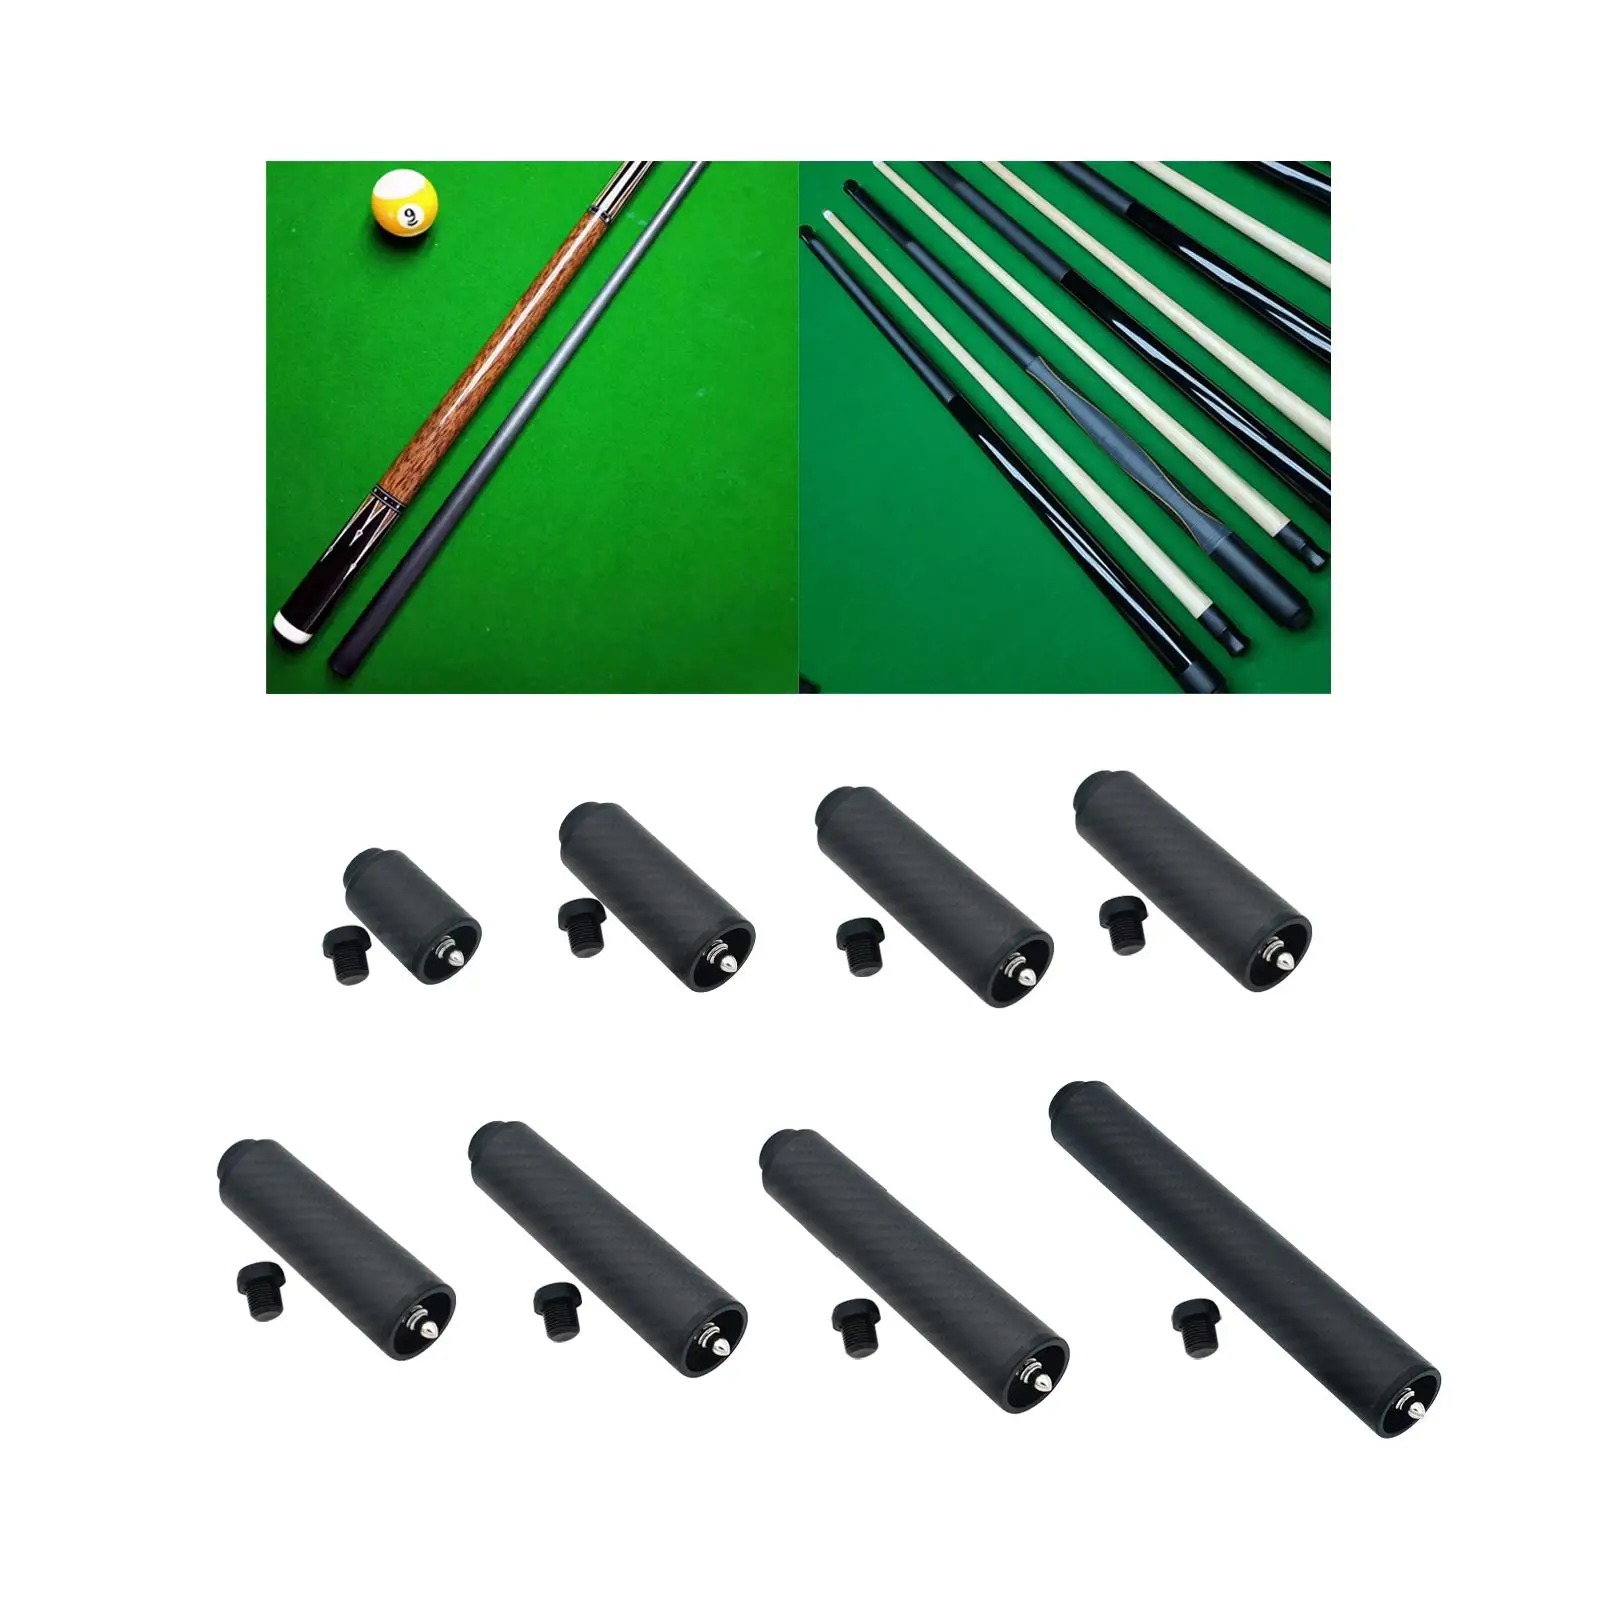 Billiards Pool Cue Extension Weights Replacement Cue Stick Extender Snooker Cue Long Extension for Enthusiast Athlete Beginners